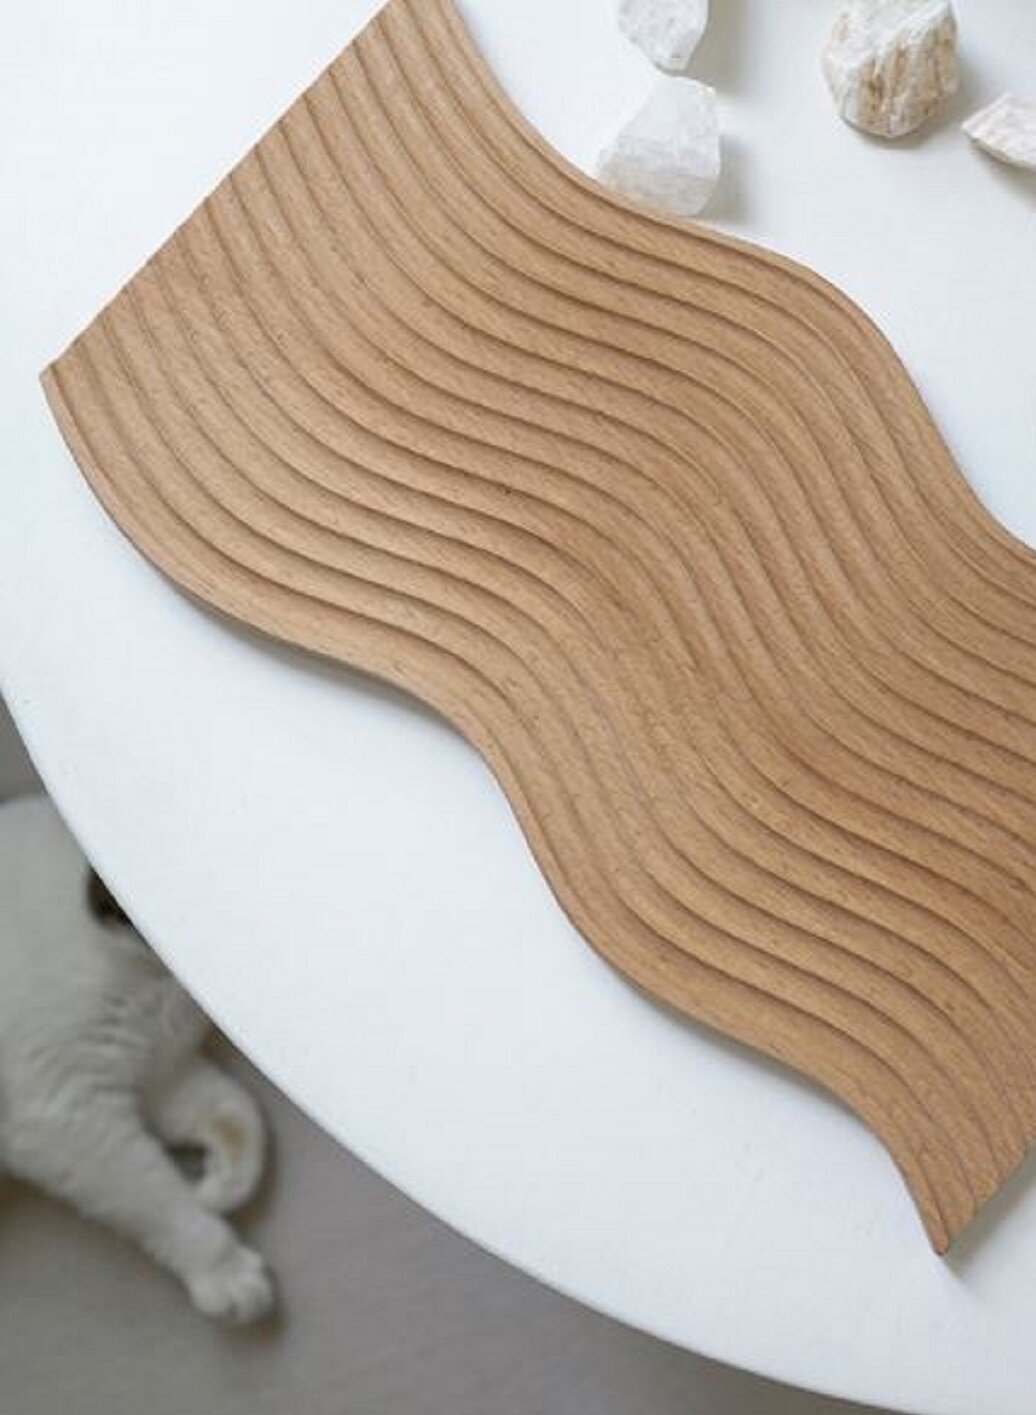 Wave wooden chopping board